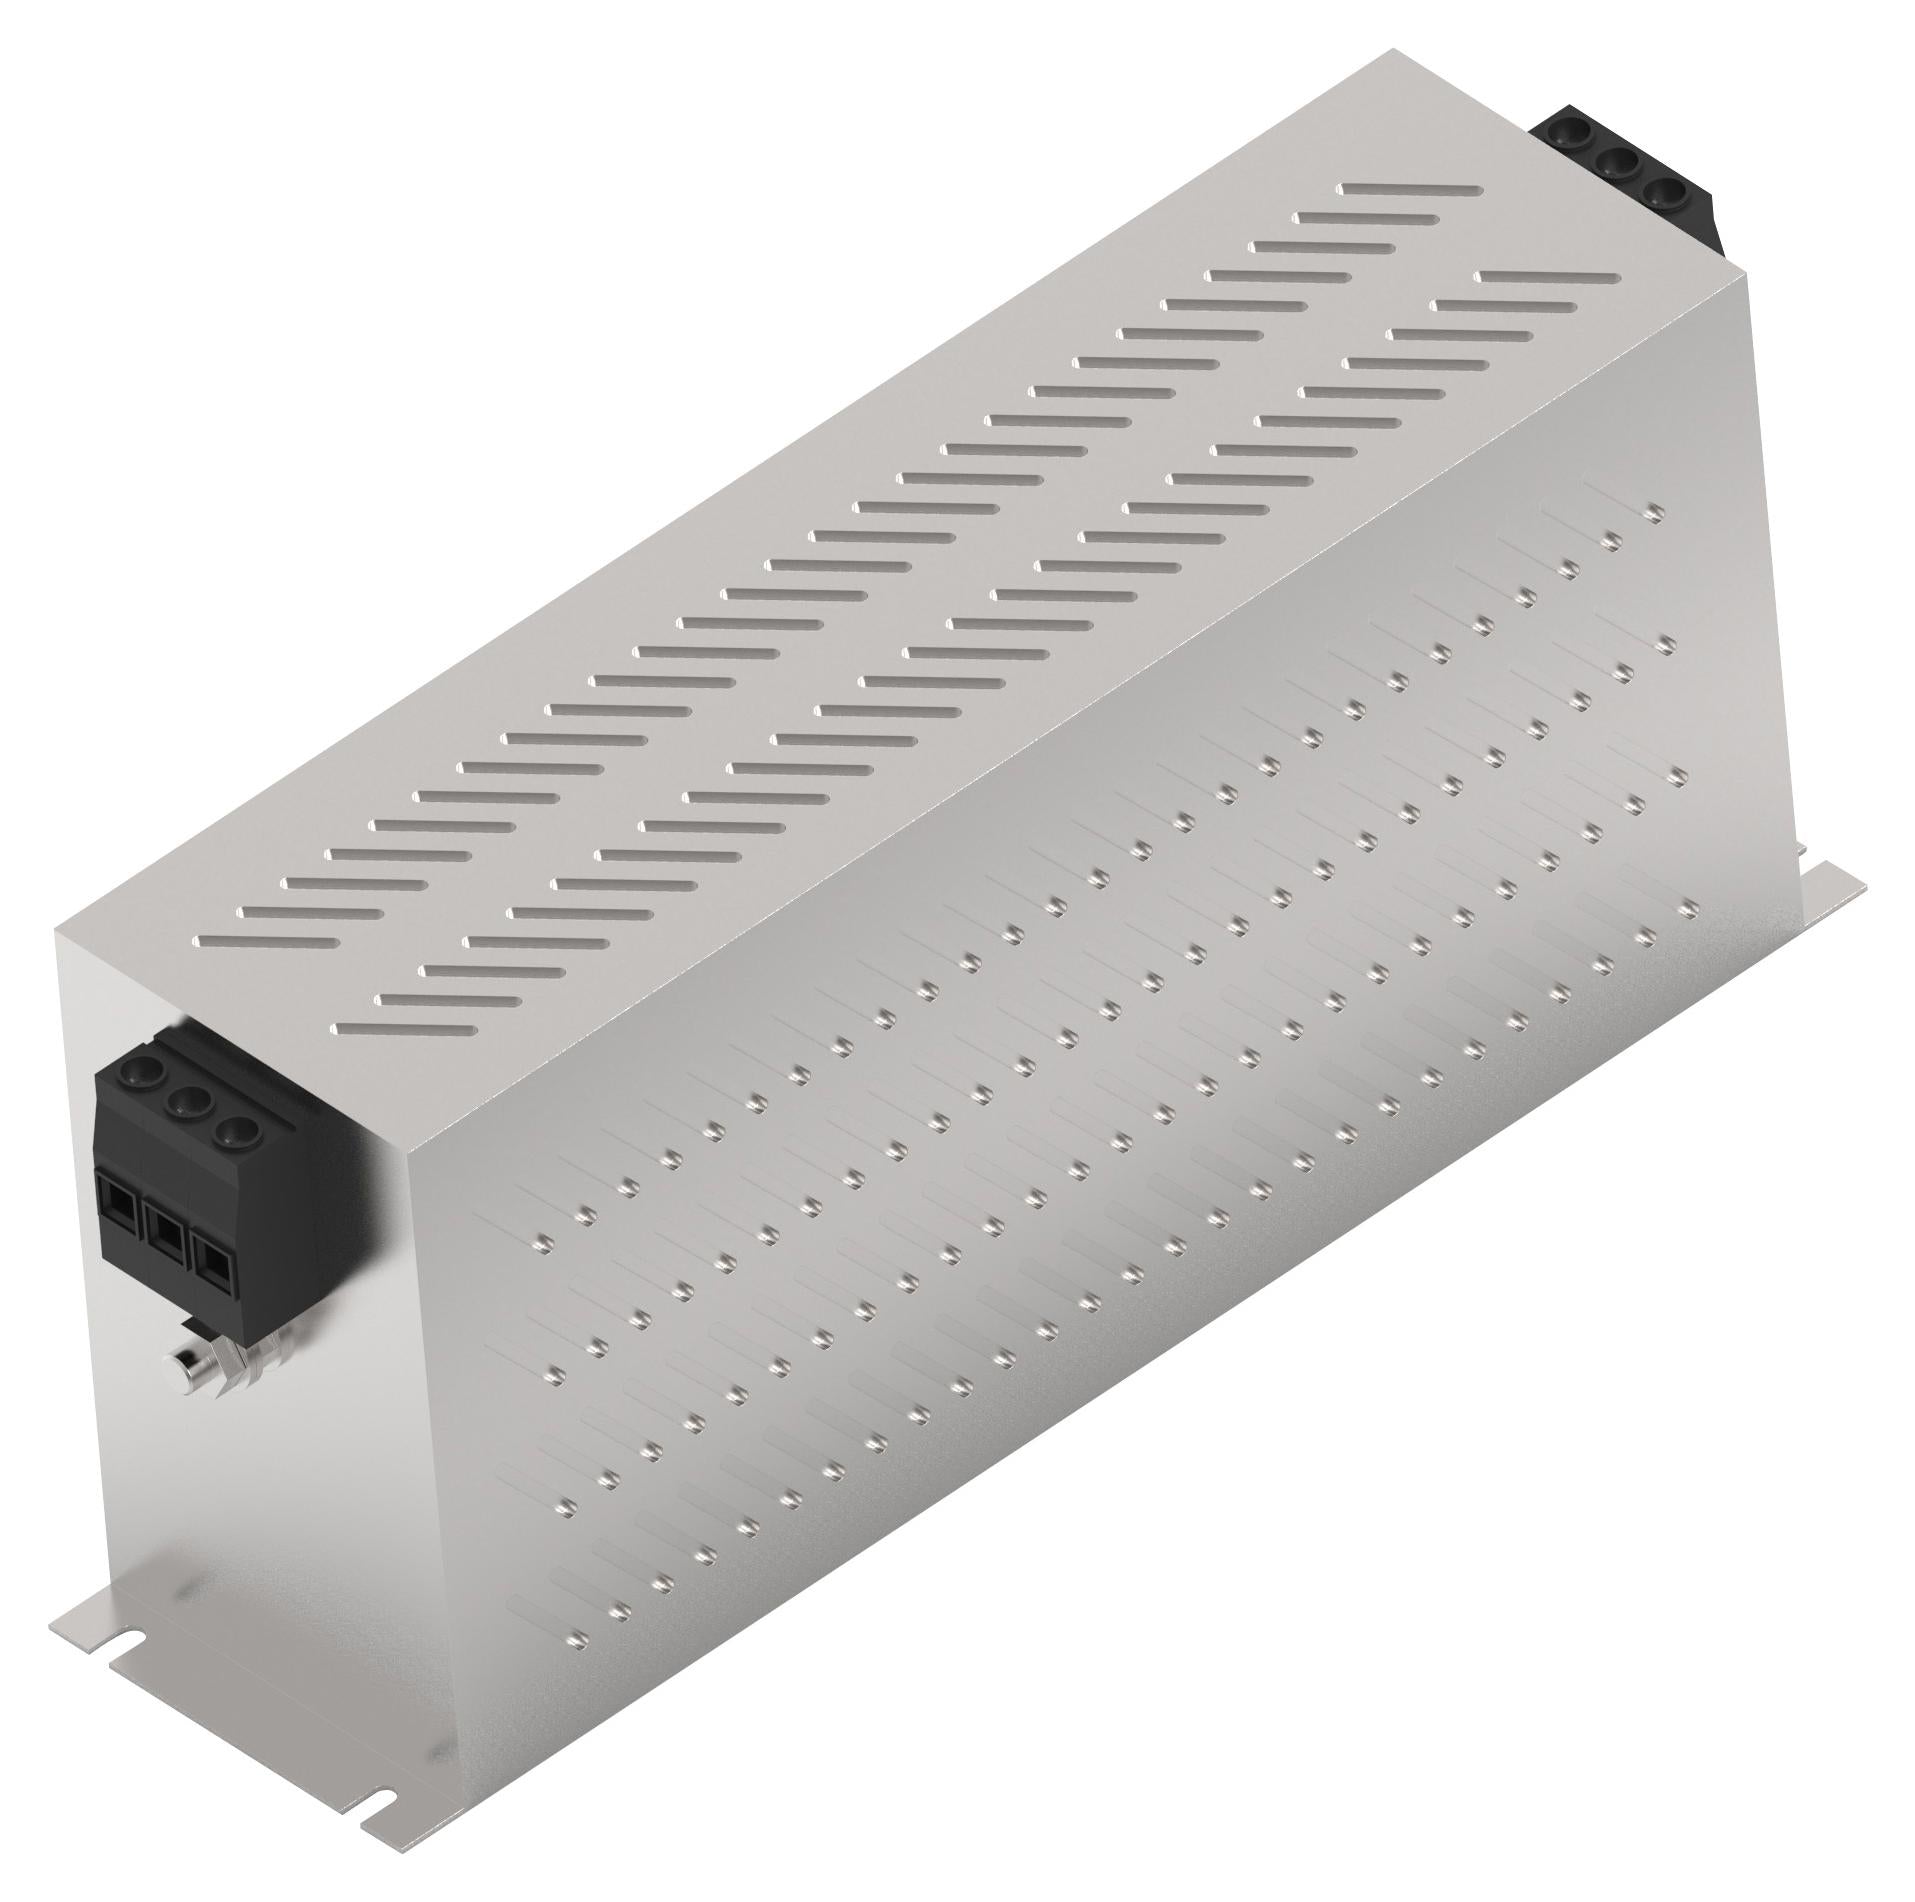 75KEHD10BBSD POWER LINE FILTER, 3 PHASE, 75A, 520VAC CORCOM - TE CONNECTIVITY